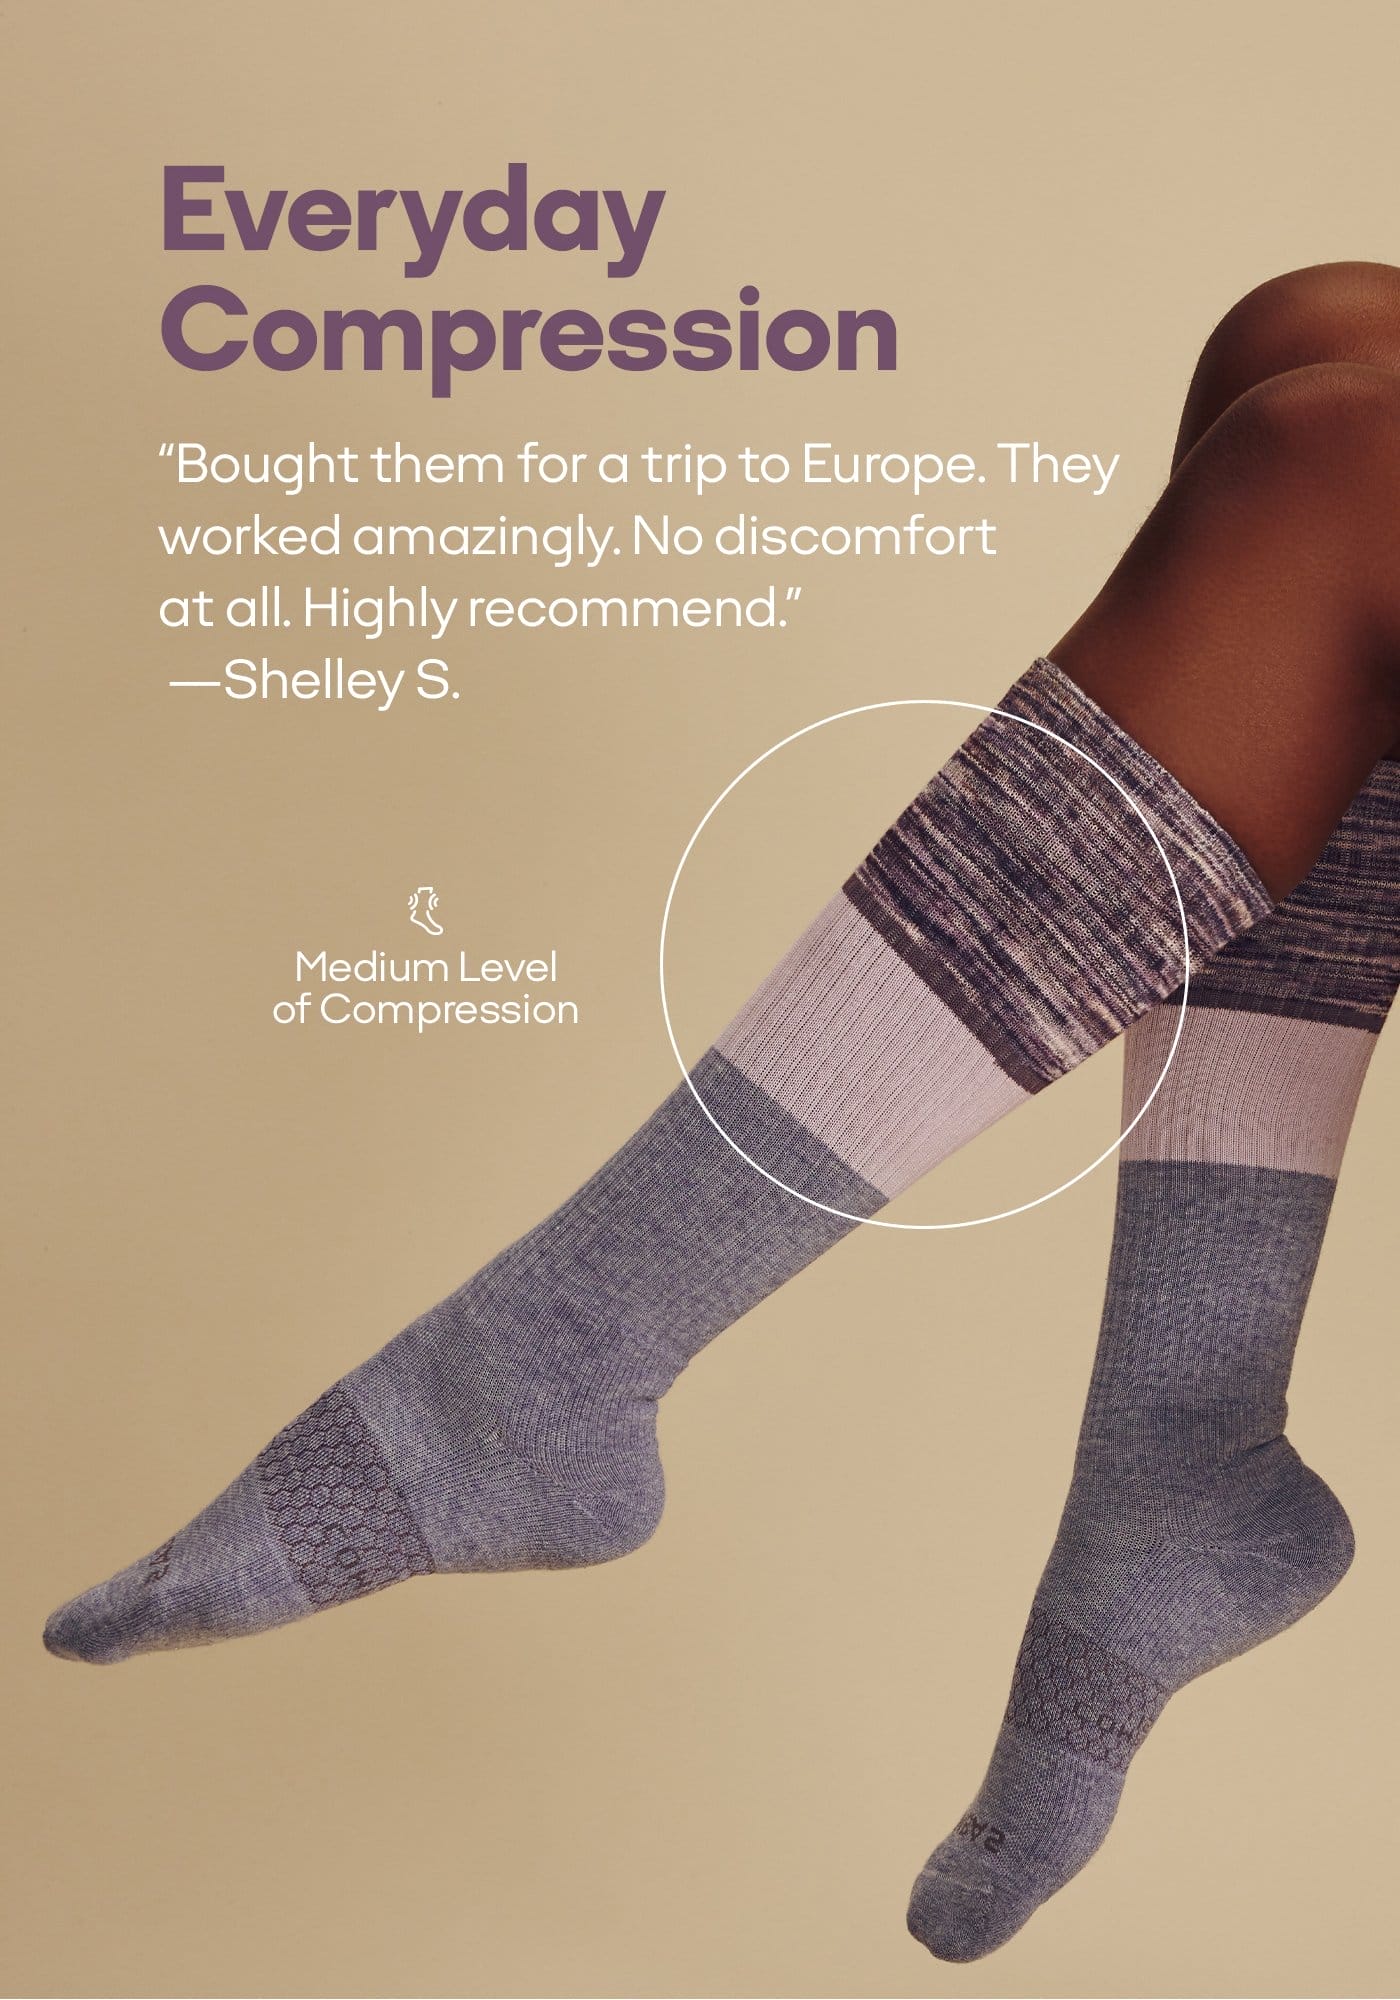 Everyday Compression | “Bought them for a trip to Europe. They worked amazingly. No discomfort at all. Highly recommend.” -Shelley S. | Medium Level of Compression